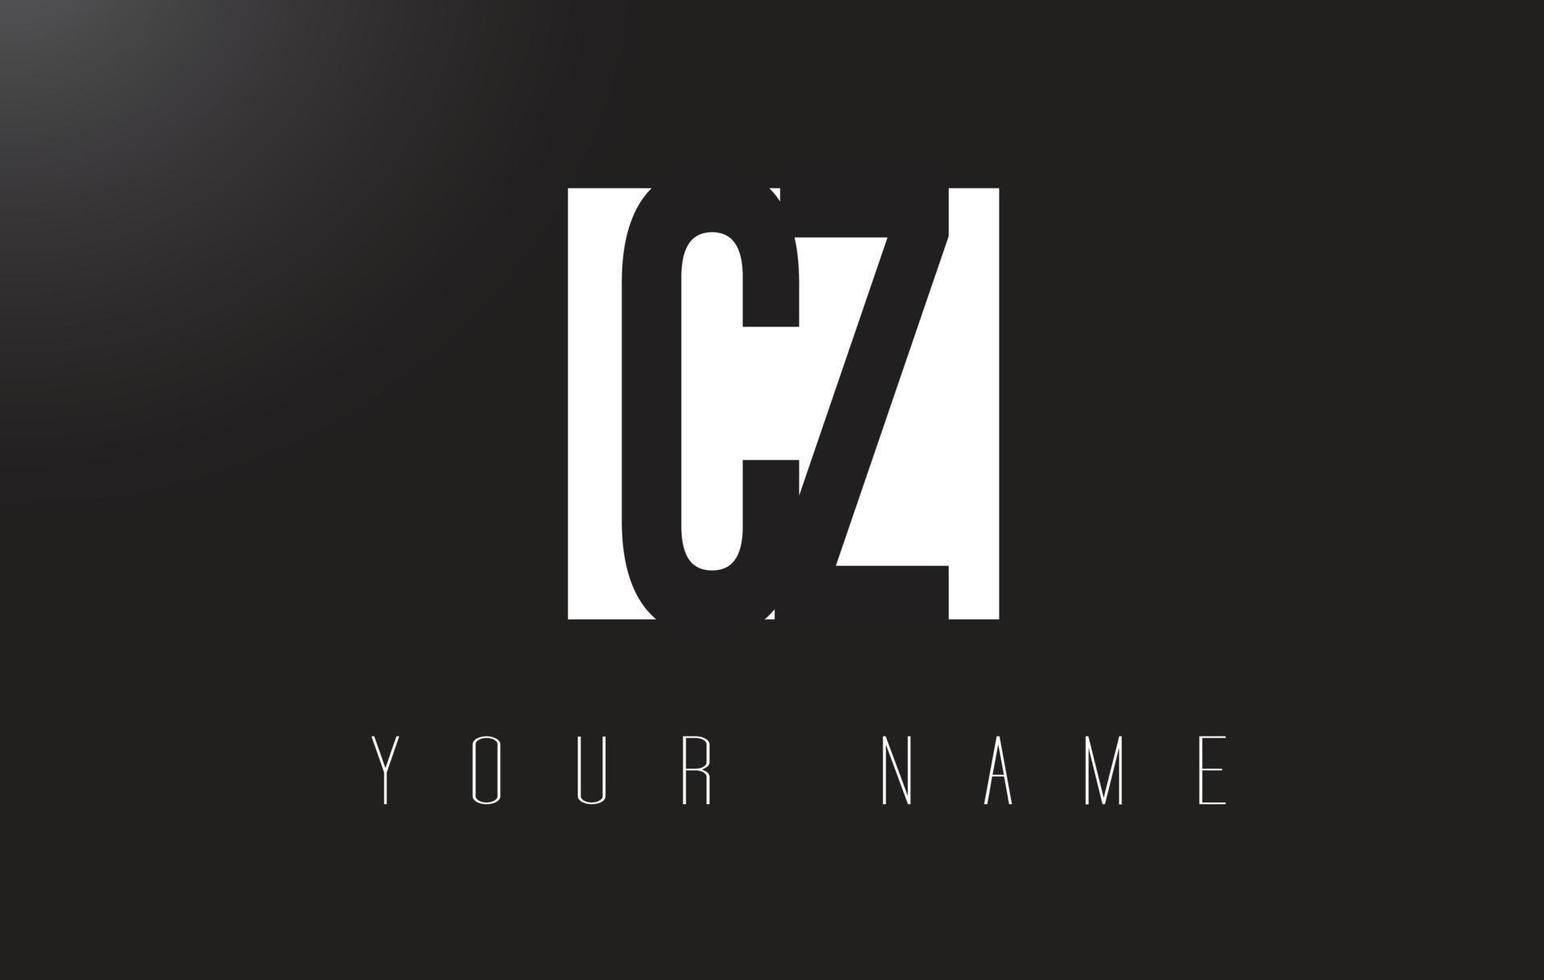 CZ Letter Logo With Black and White Negative Space Design. vector